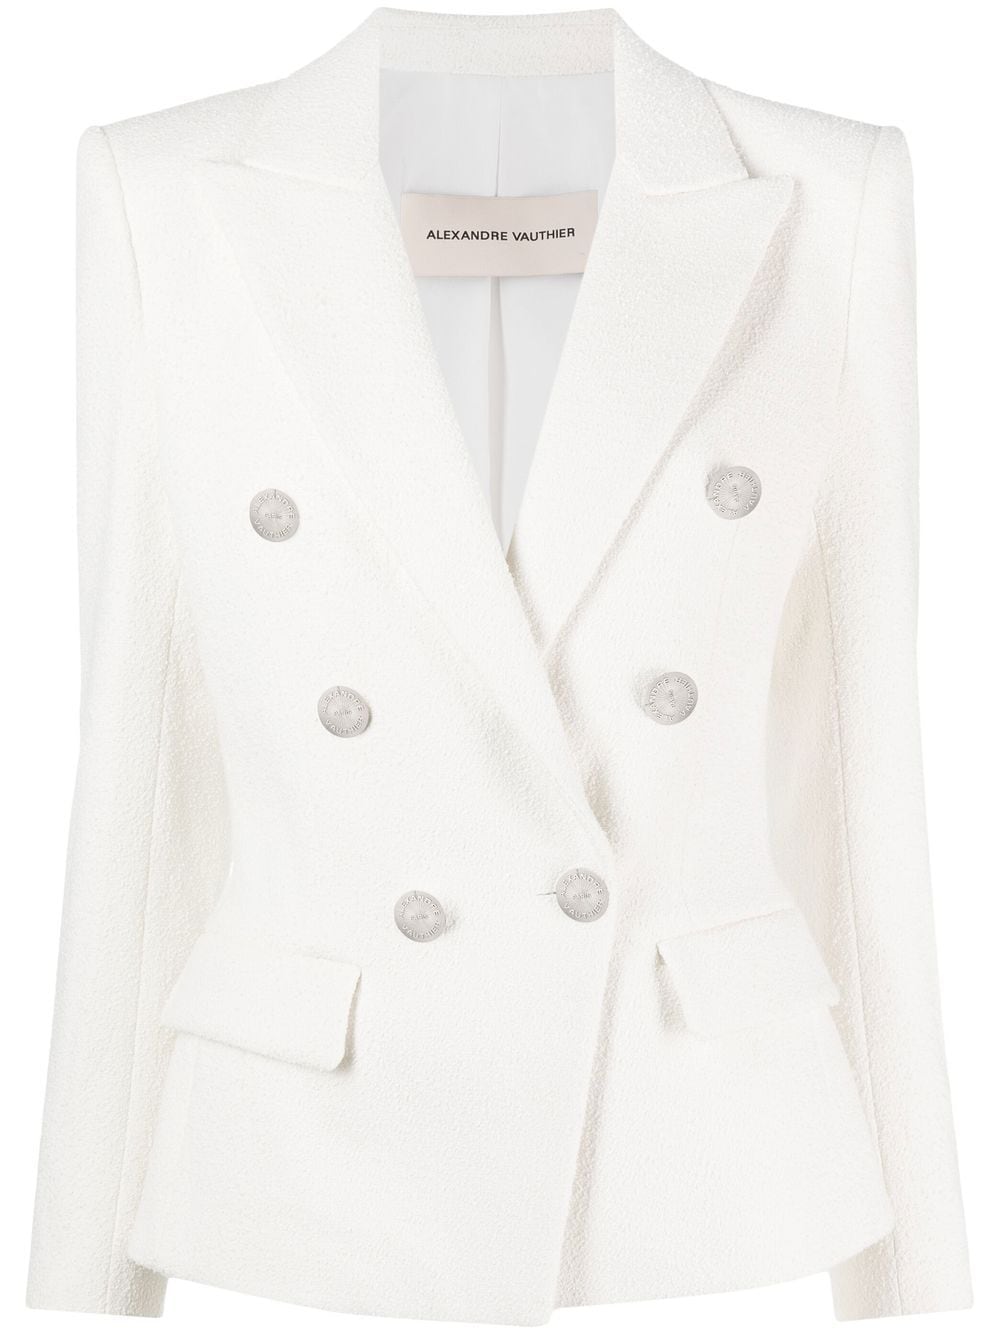 Image 1 of Alexandre Vauthier double-breasted button-fastening jacket